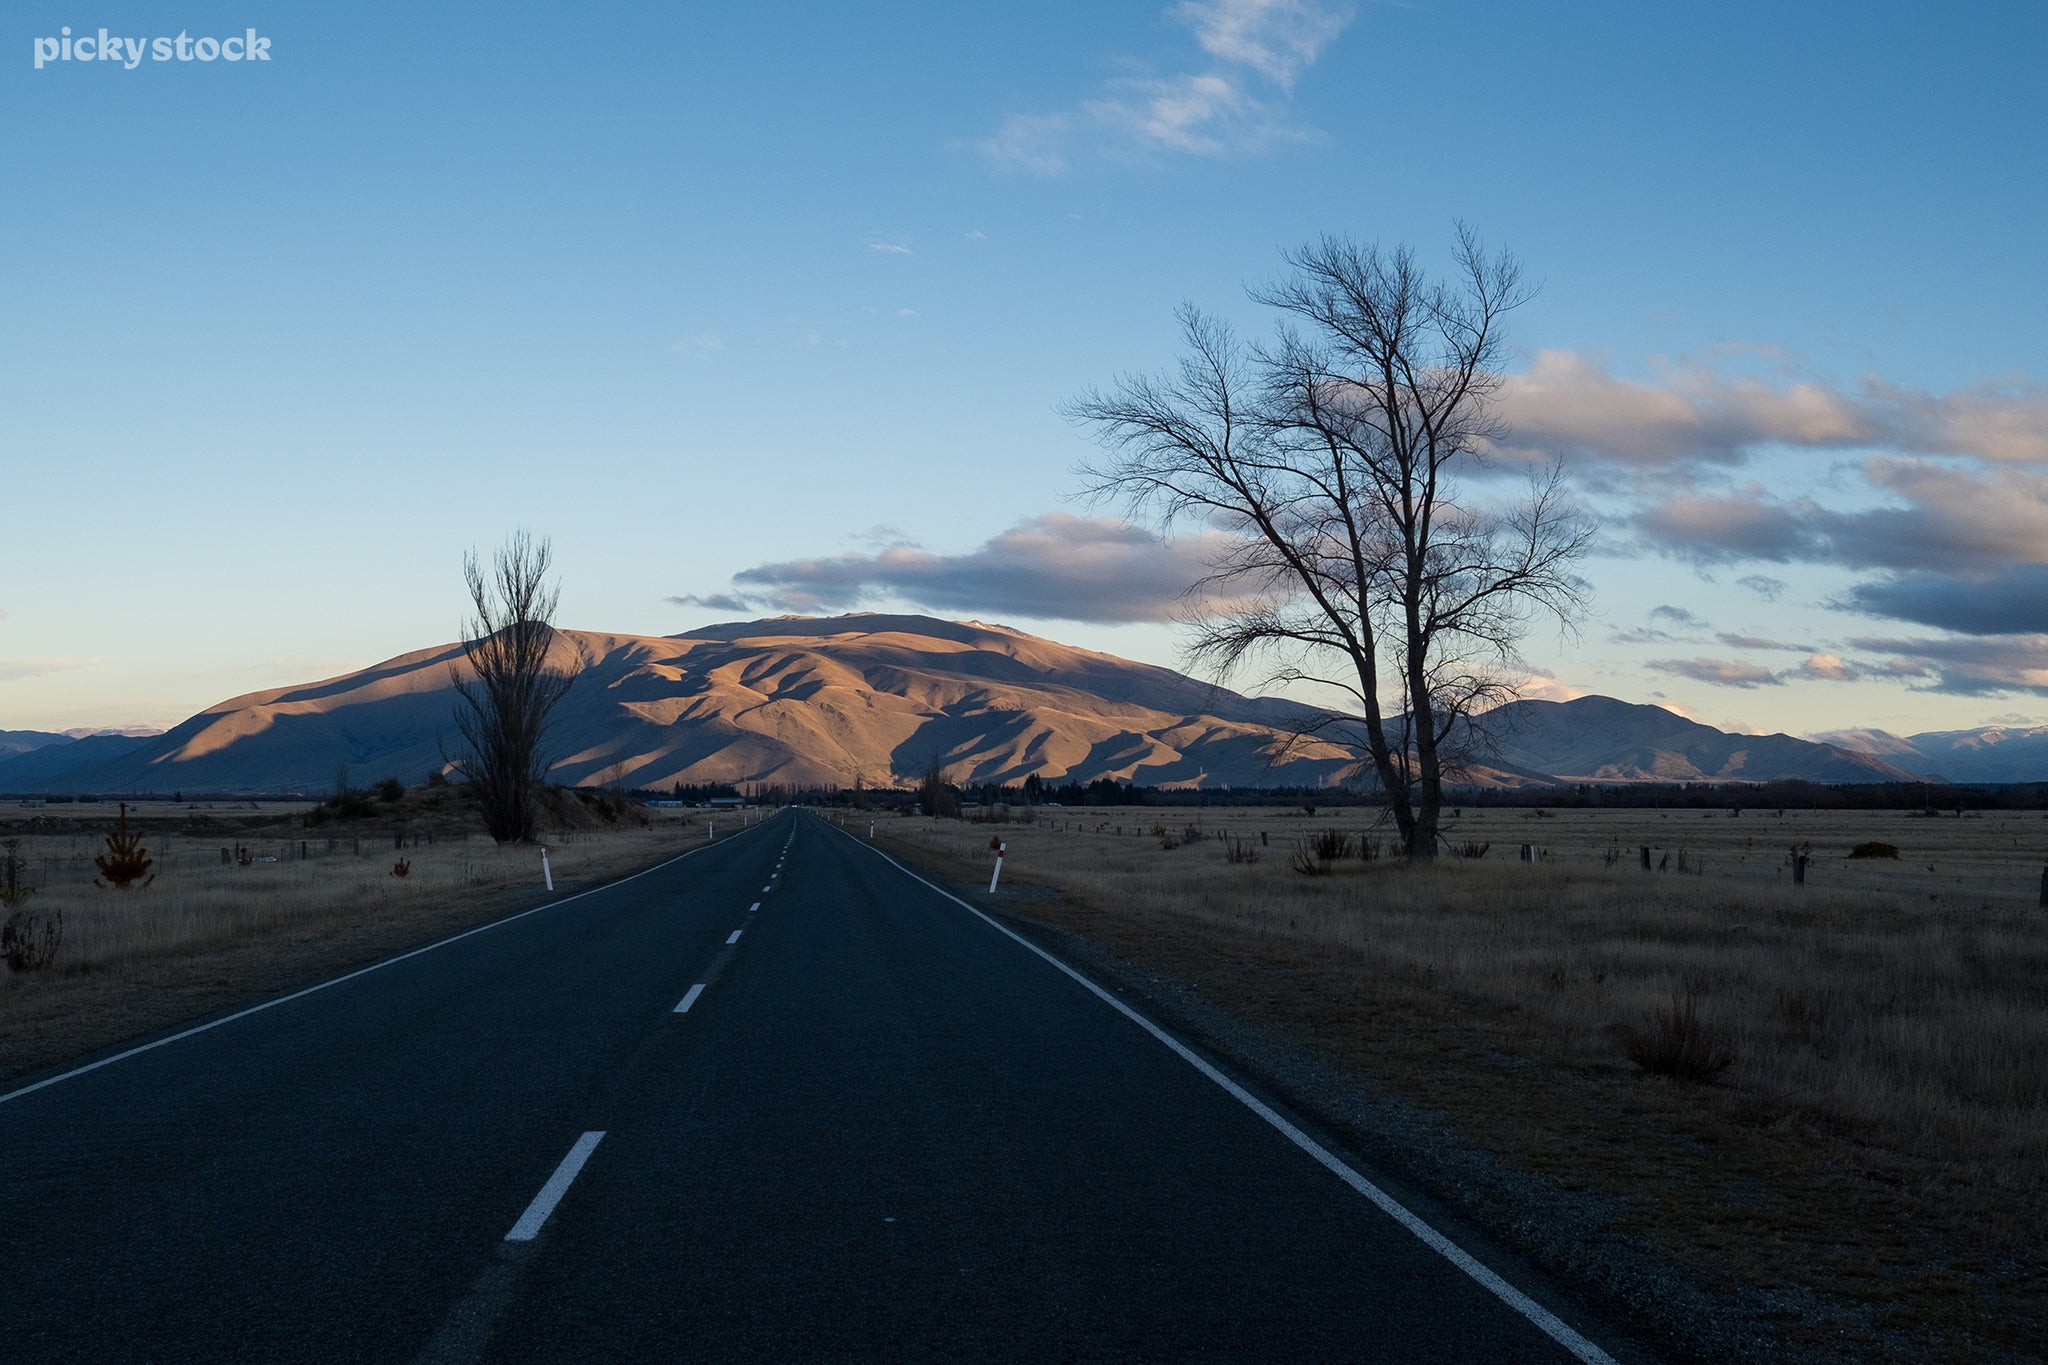 Landscape of a single road stretching across flatlands towards a golden hillside, the shadows cast hard lines across the mountains like a sharp rock, The road is flanked by dead trees waving in the afternoon light.